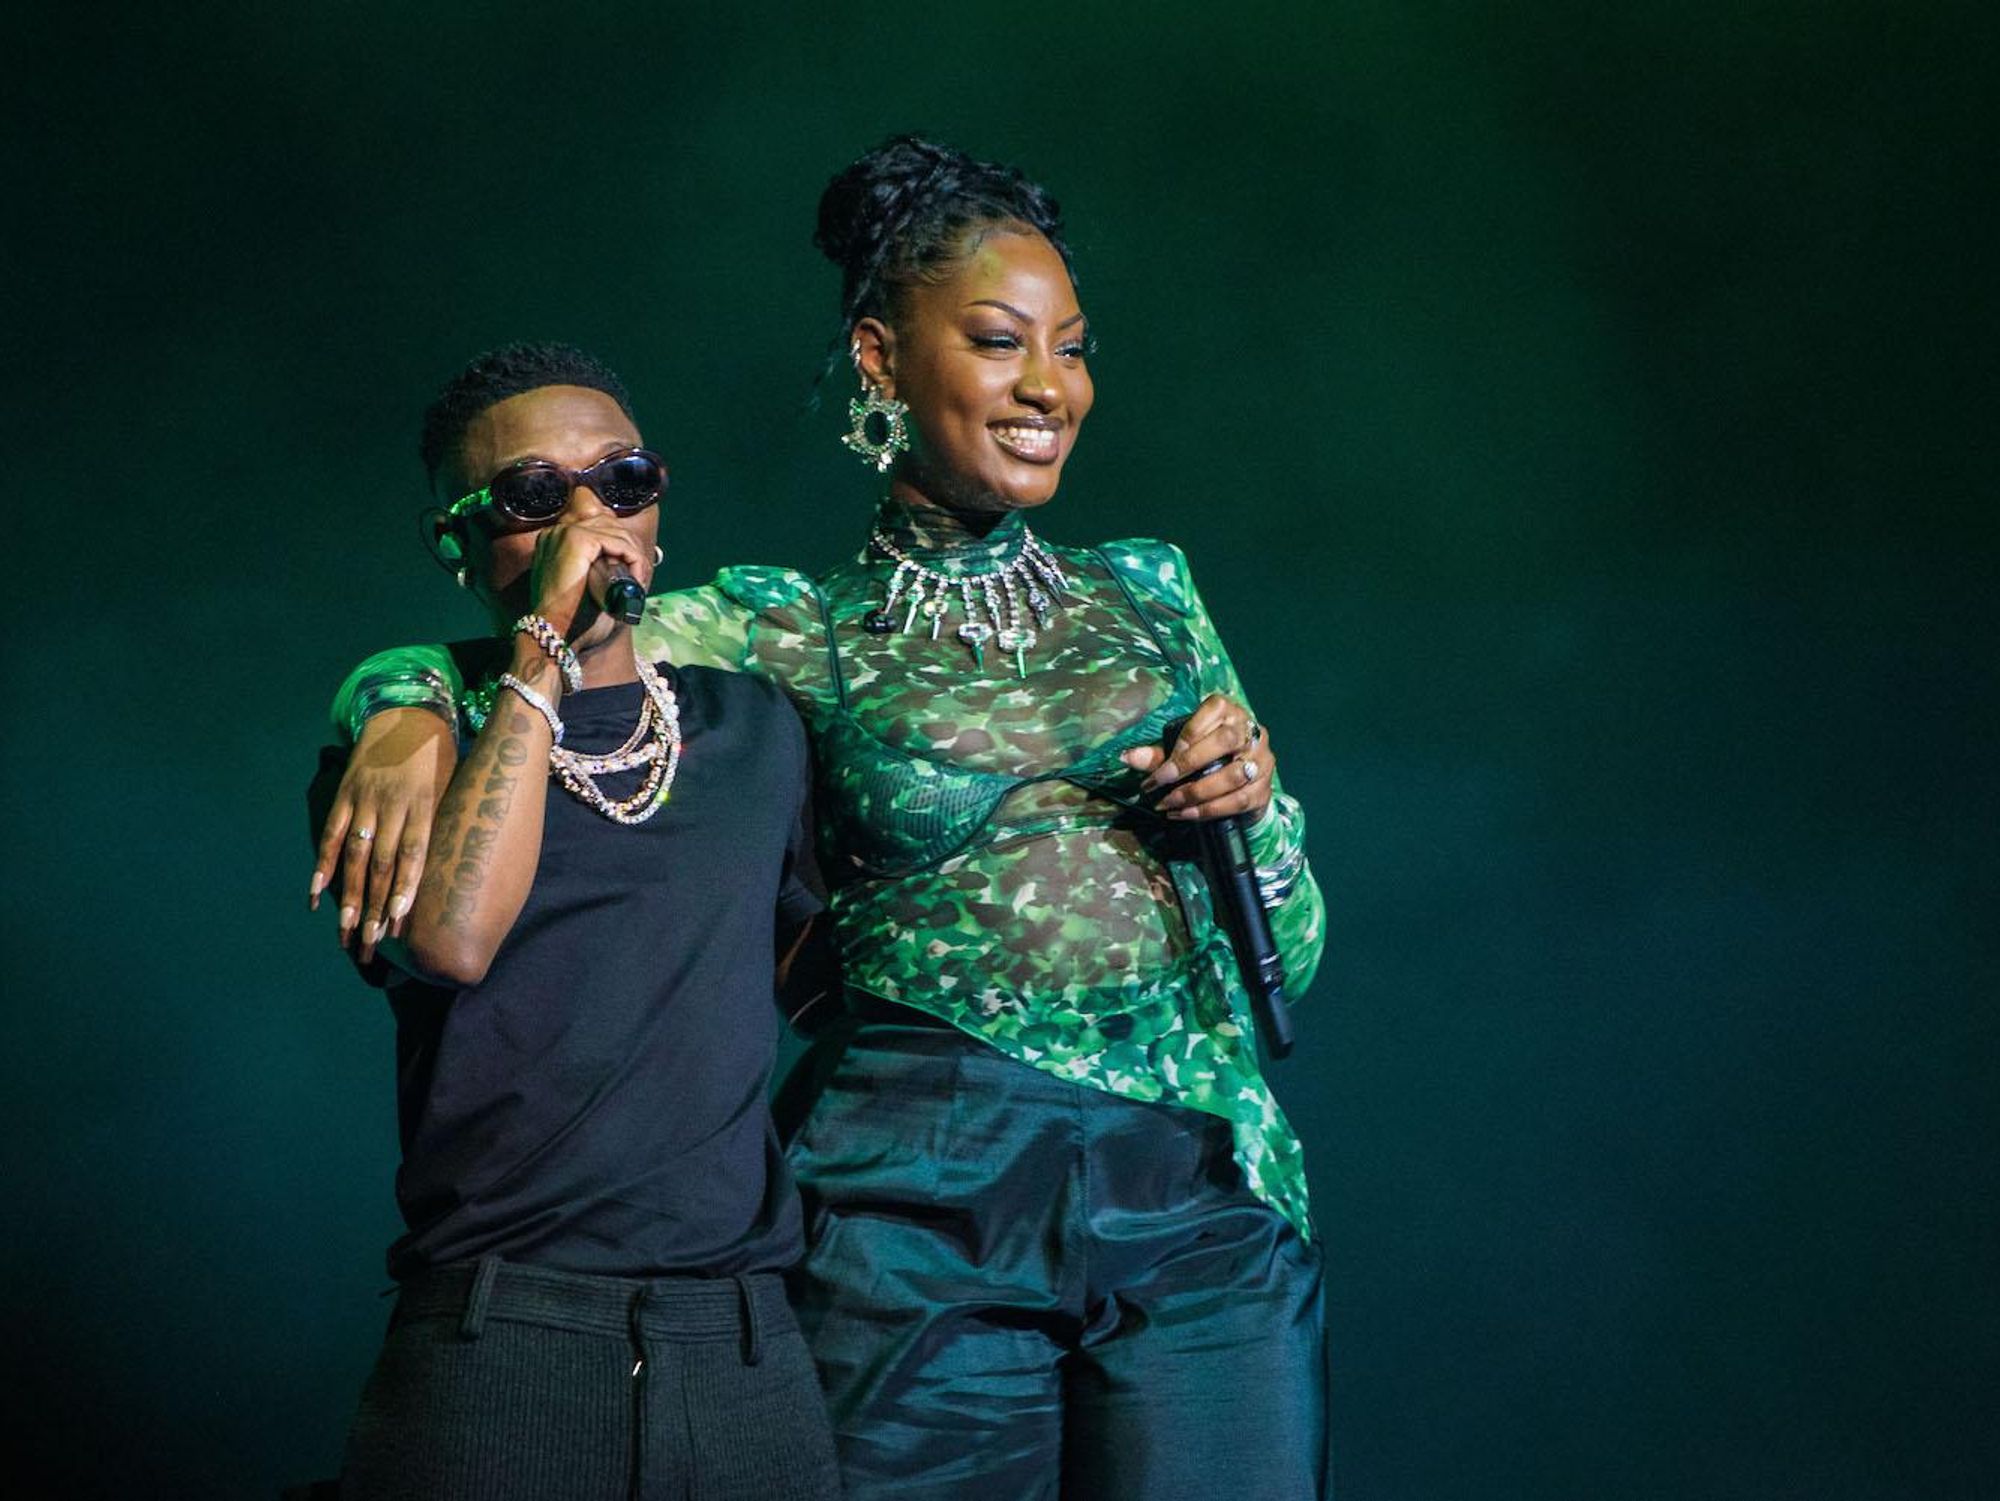 Wizkid and Tems performing together wearing green shirt and sunglasses.  